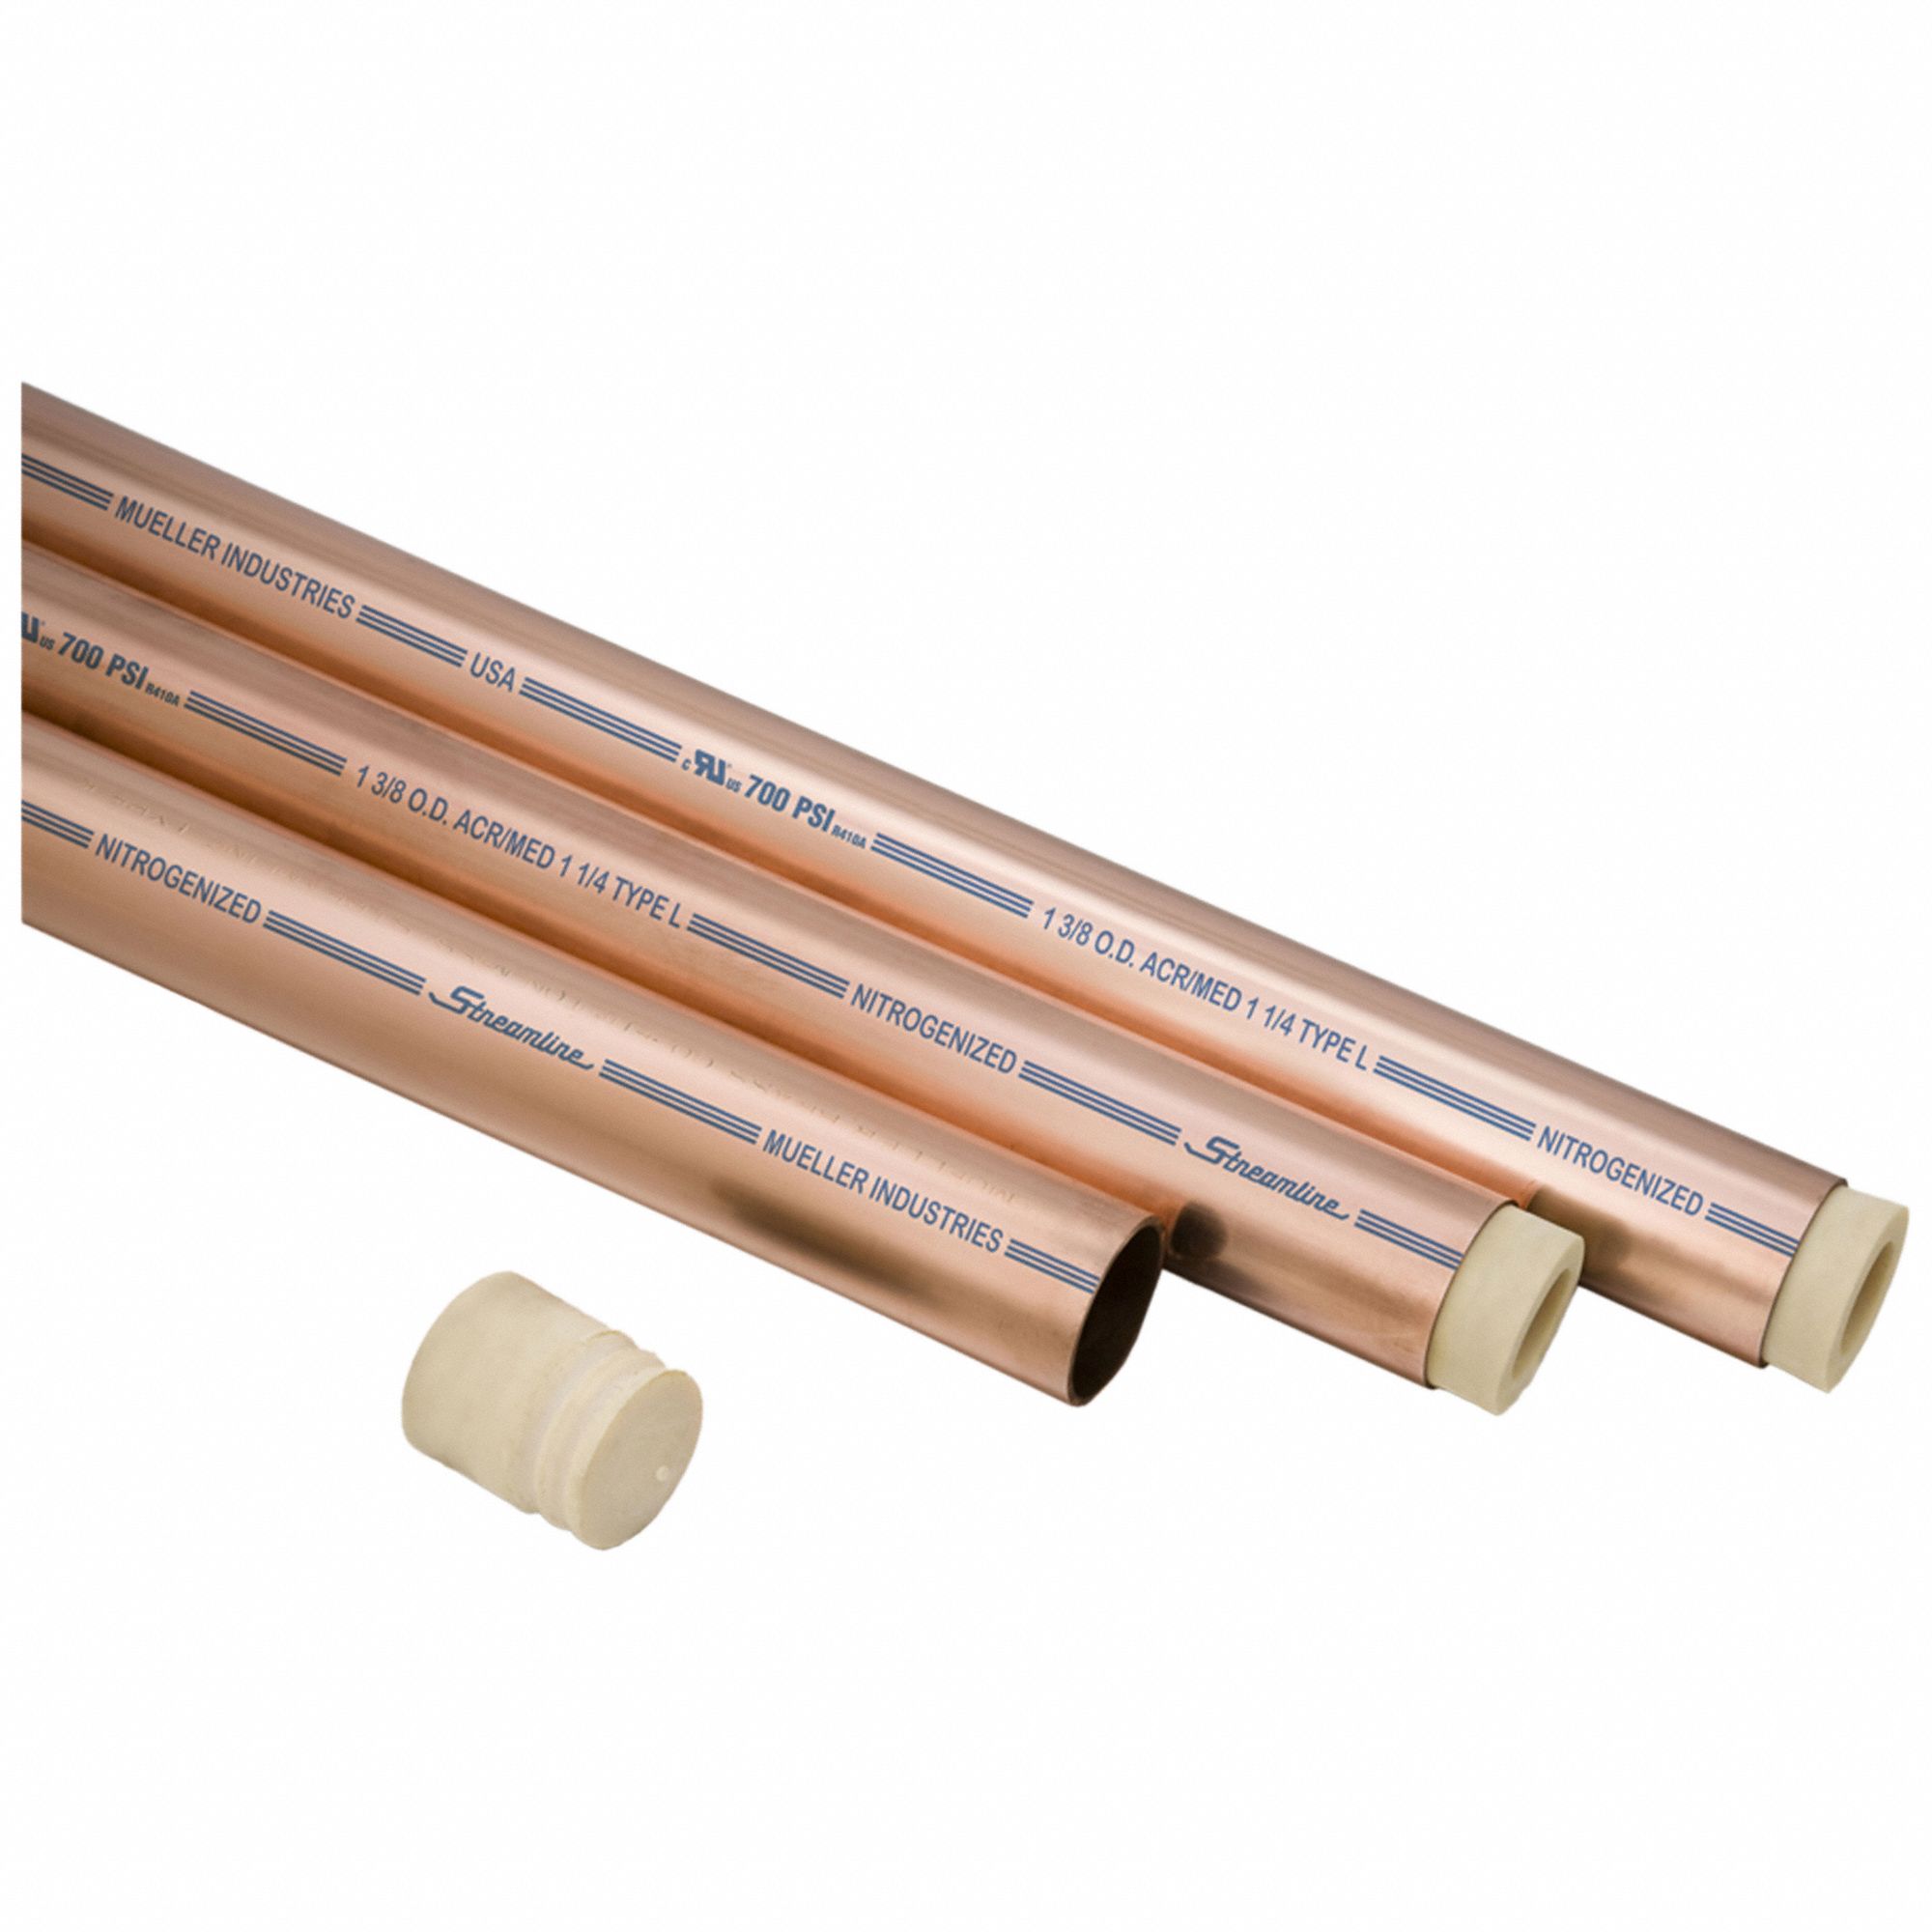 4 Type L Copper Pipe, 5' Length